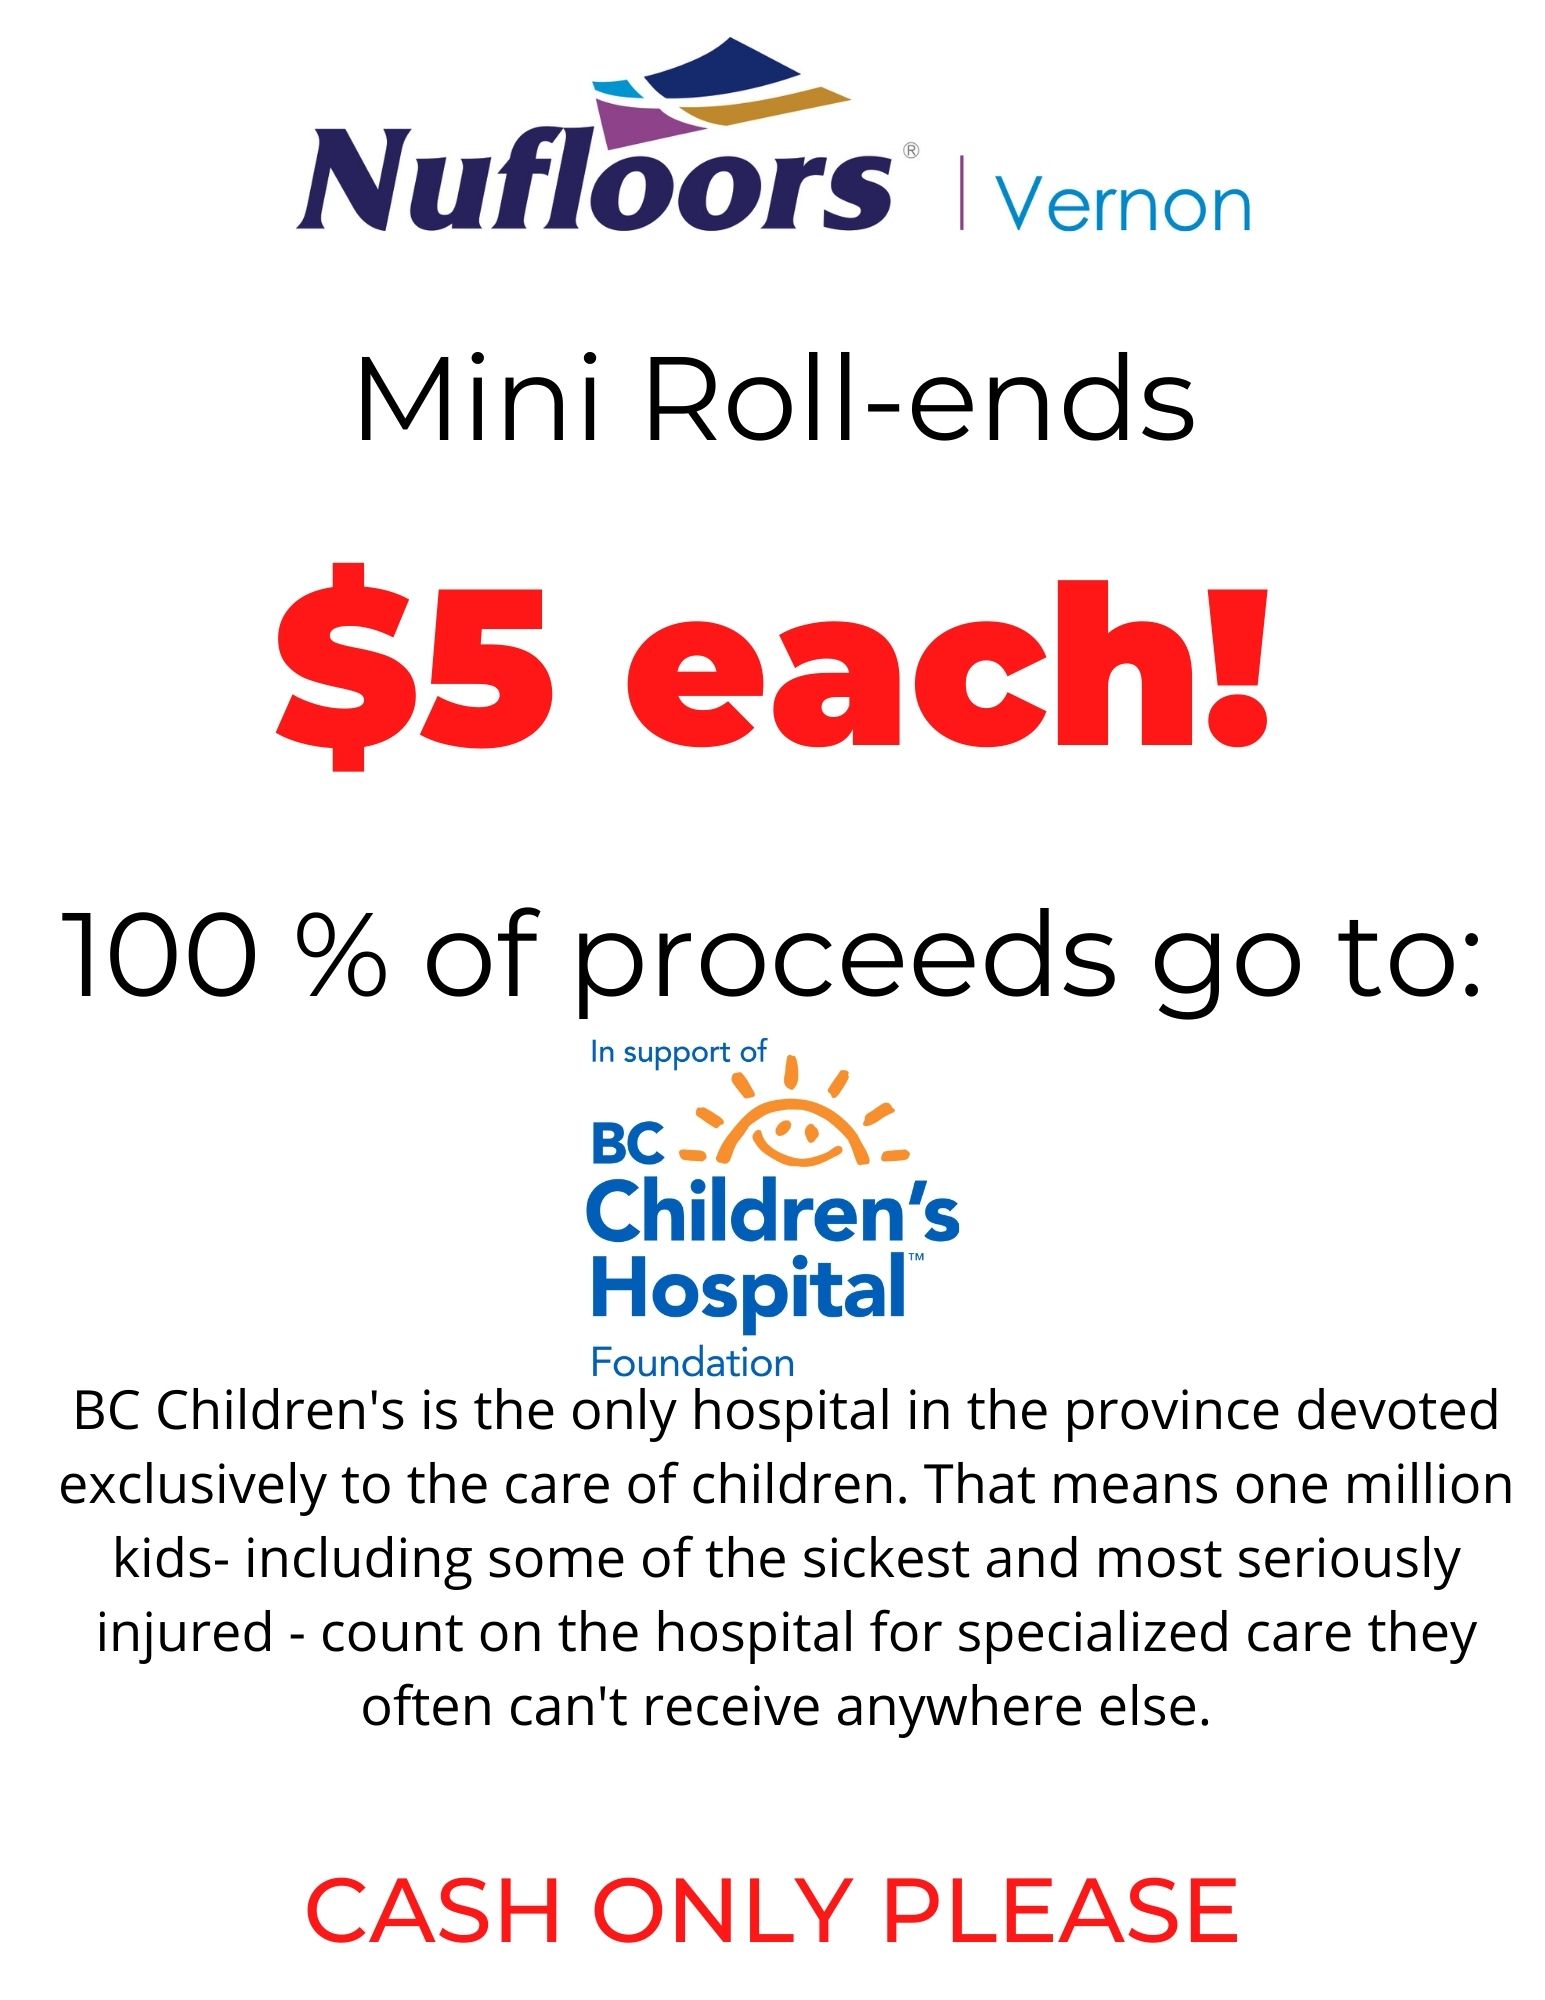 Mini Roll-ends for BCCH!